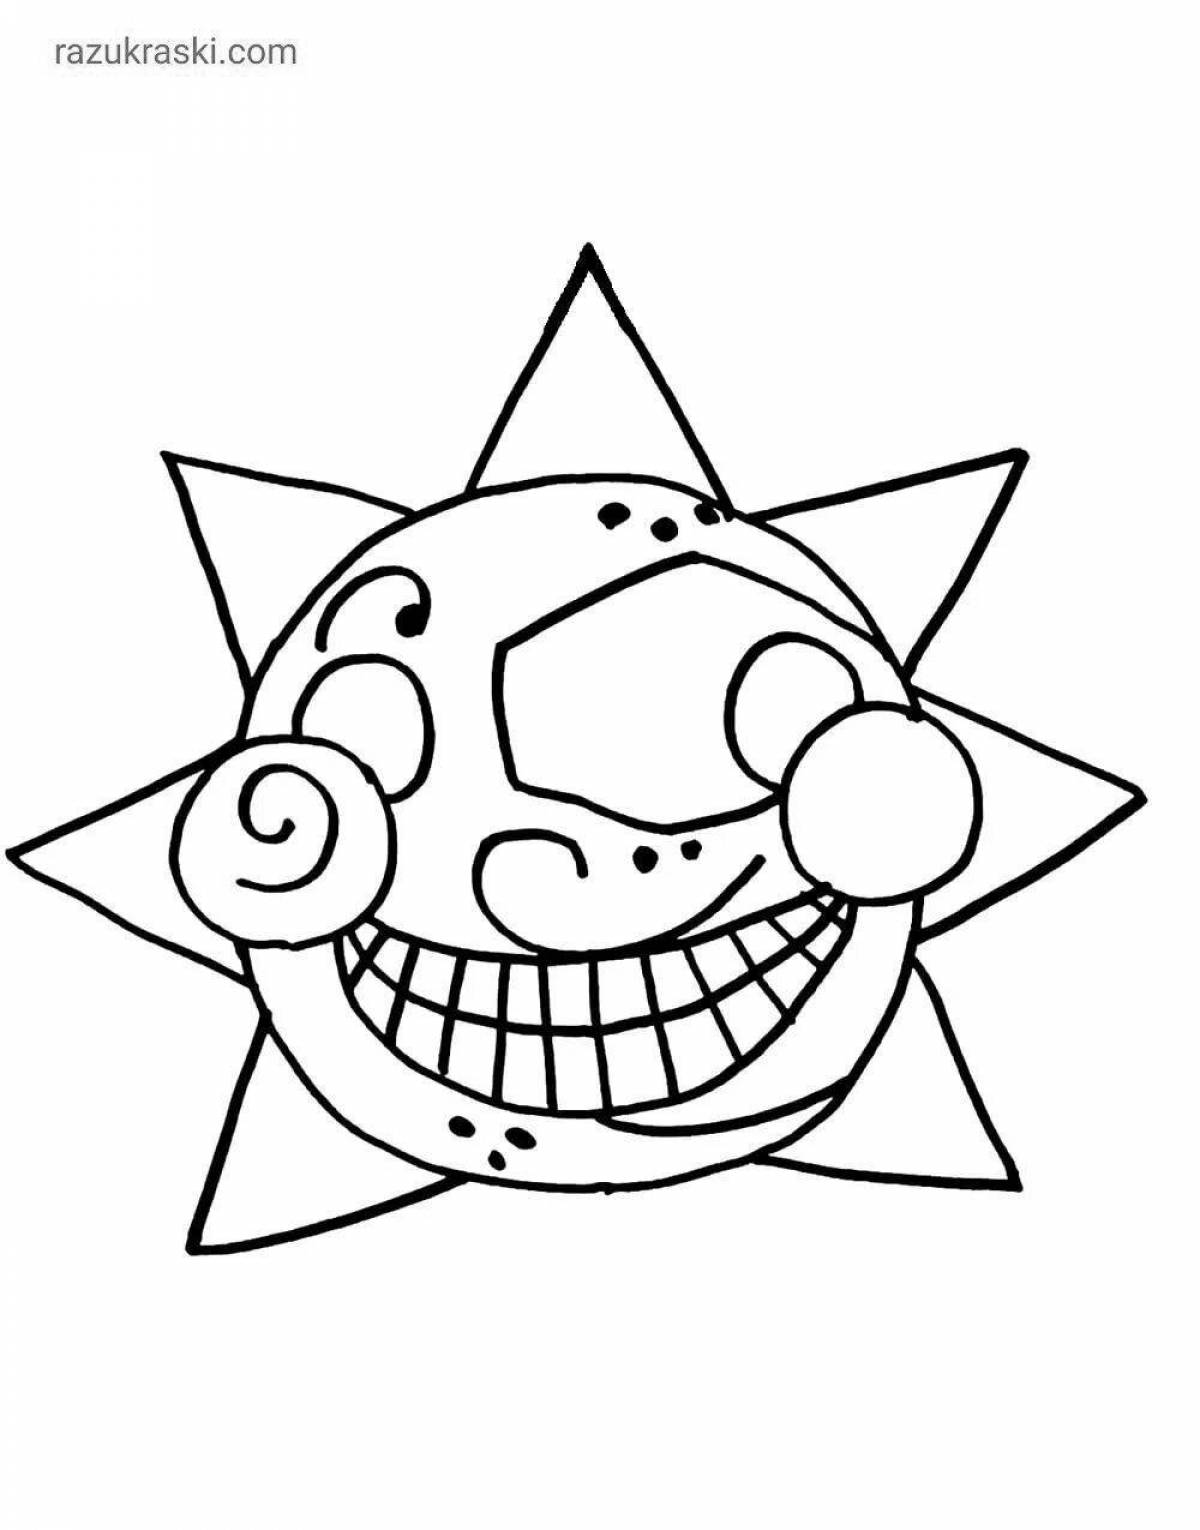 Charming sun and moon animatronics coloring book for kids